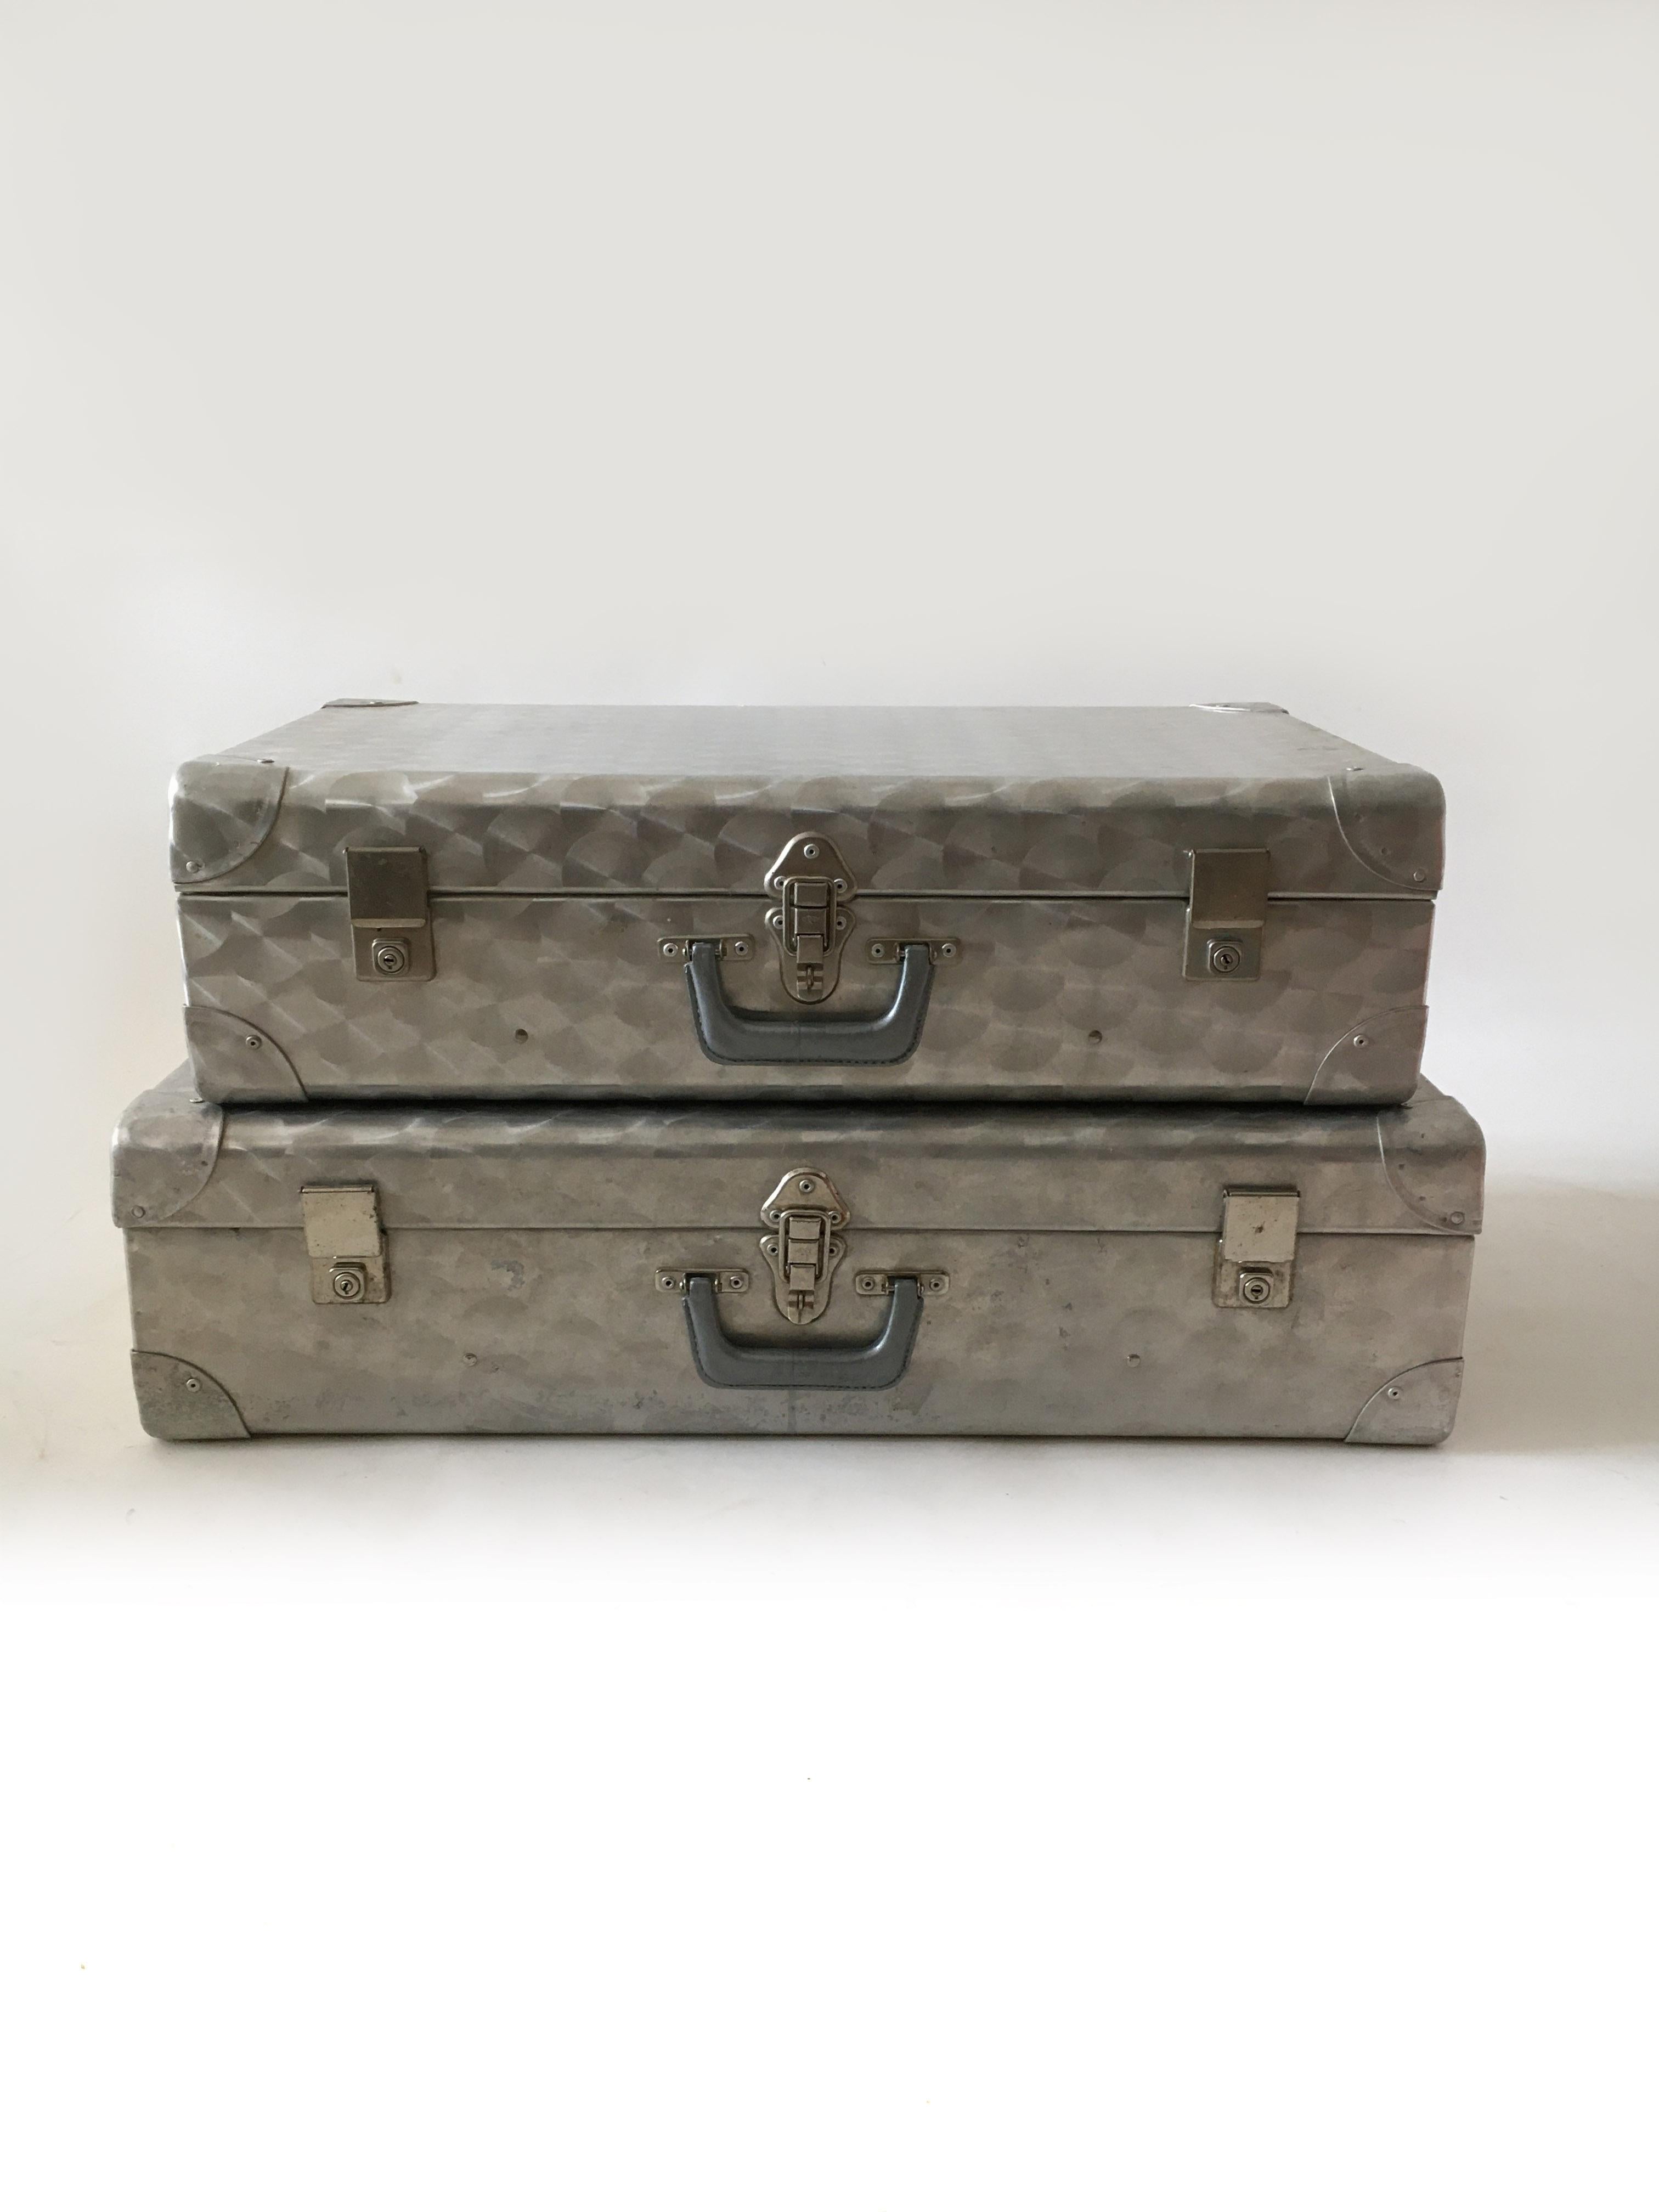 Cheney, London aluminum suitcase luggage, set of two, England, 1960s. A beautiful and seemingly rare set of two Cheney.